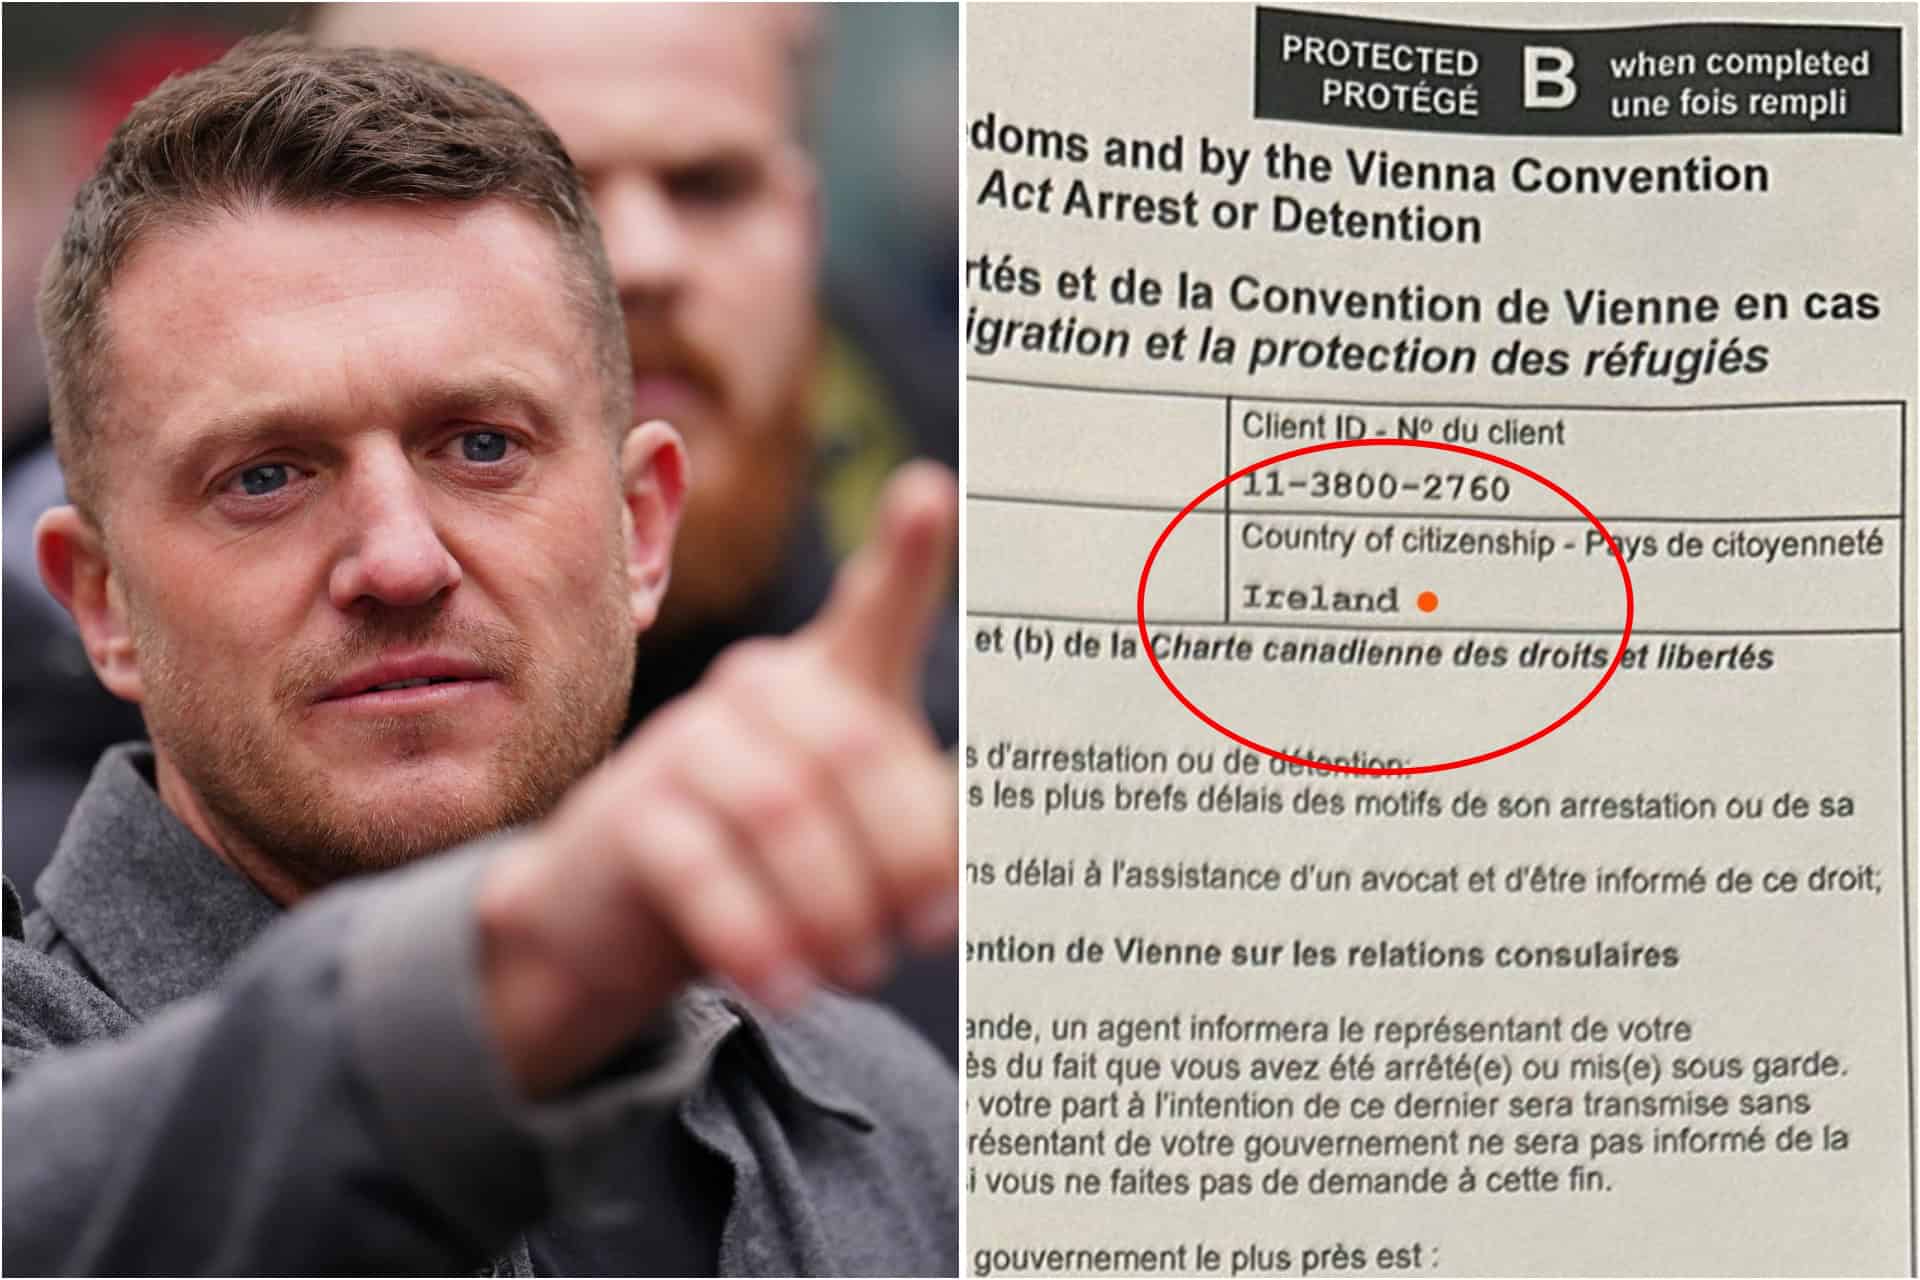 Canadian arrest document shows Tommy Robinson is an Irish citizen